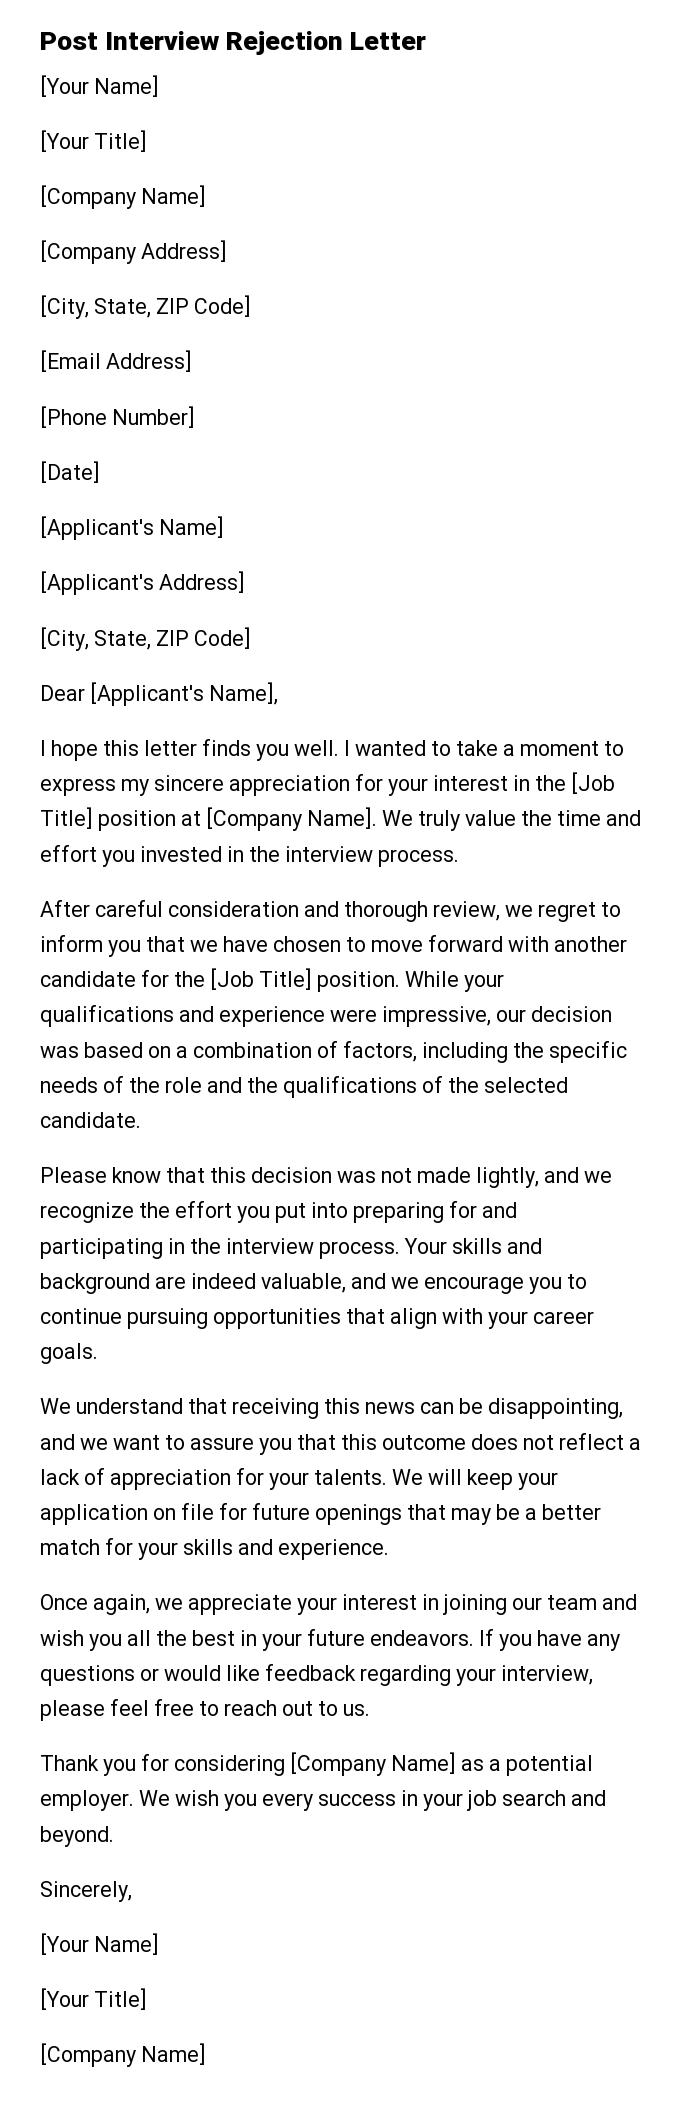 Post Interview Rejection Letter